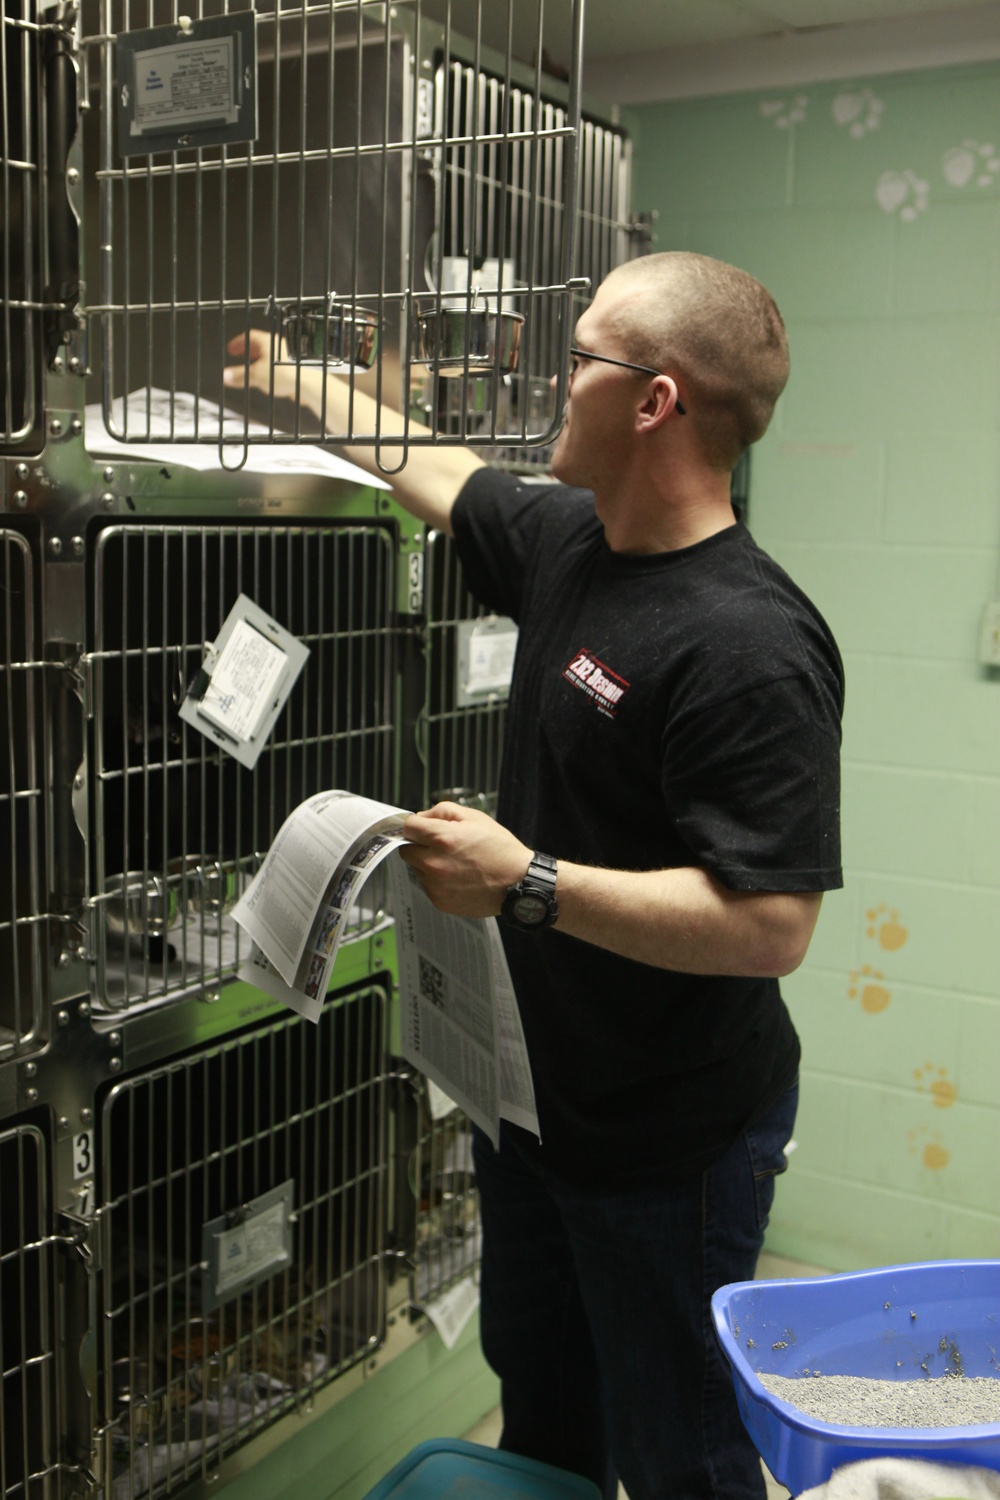 Marines help care for homeless animals